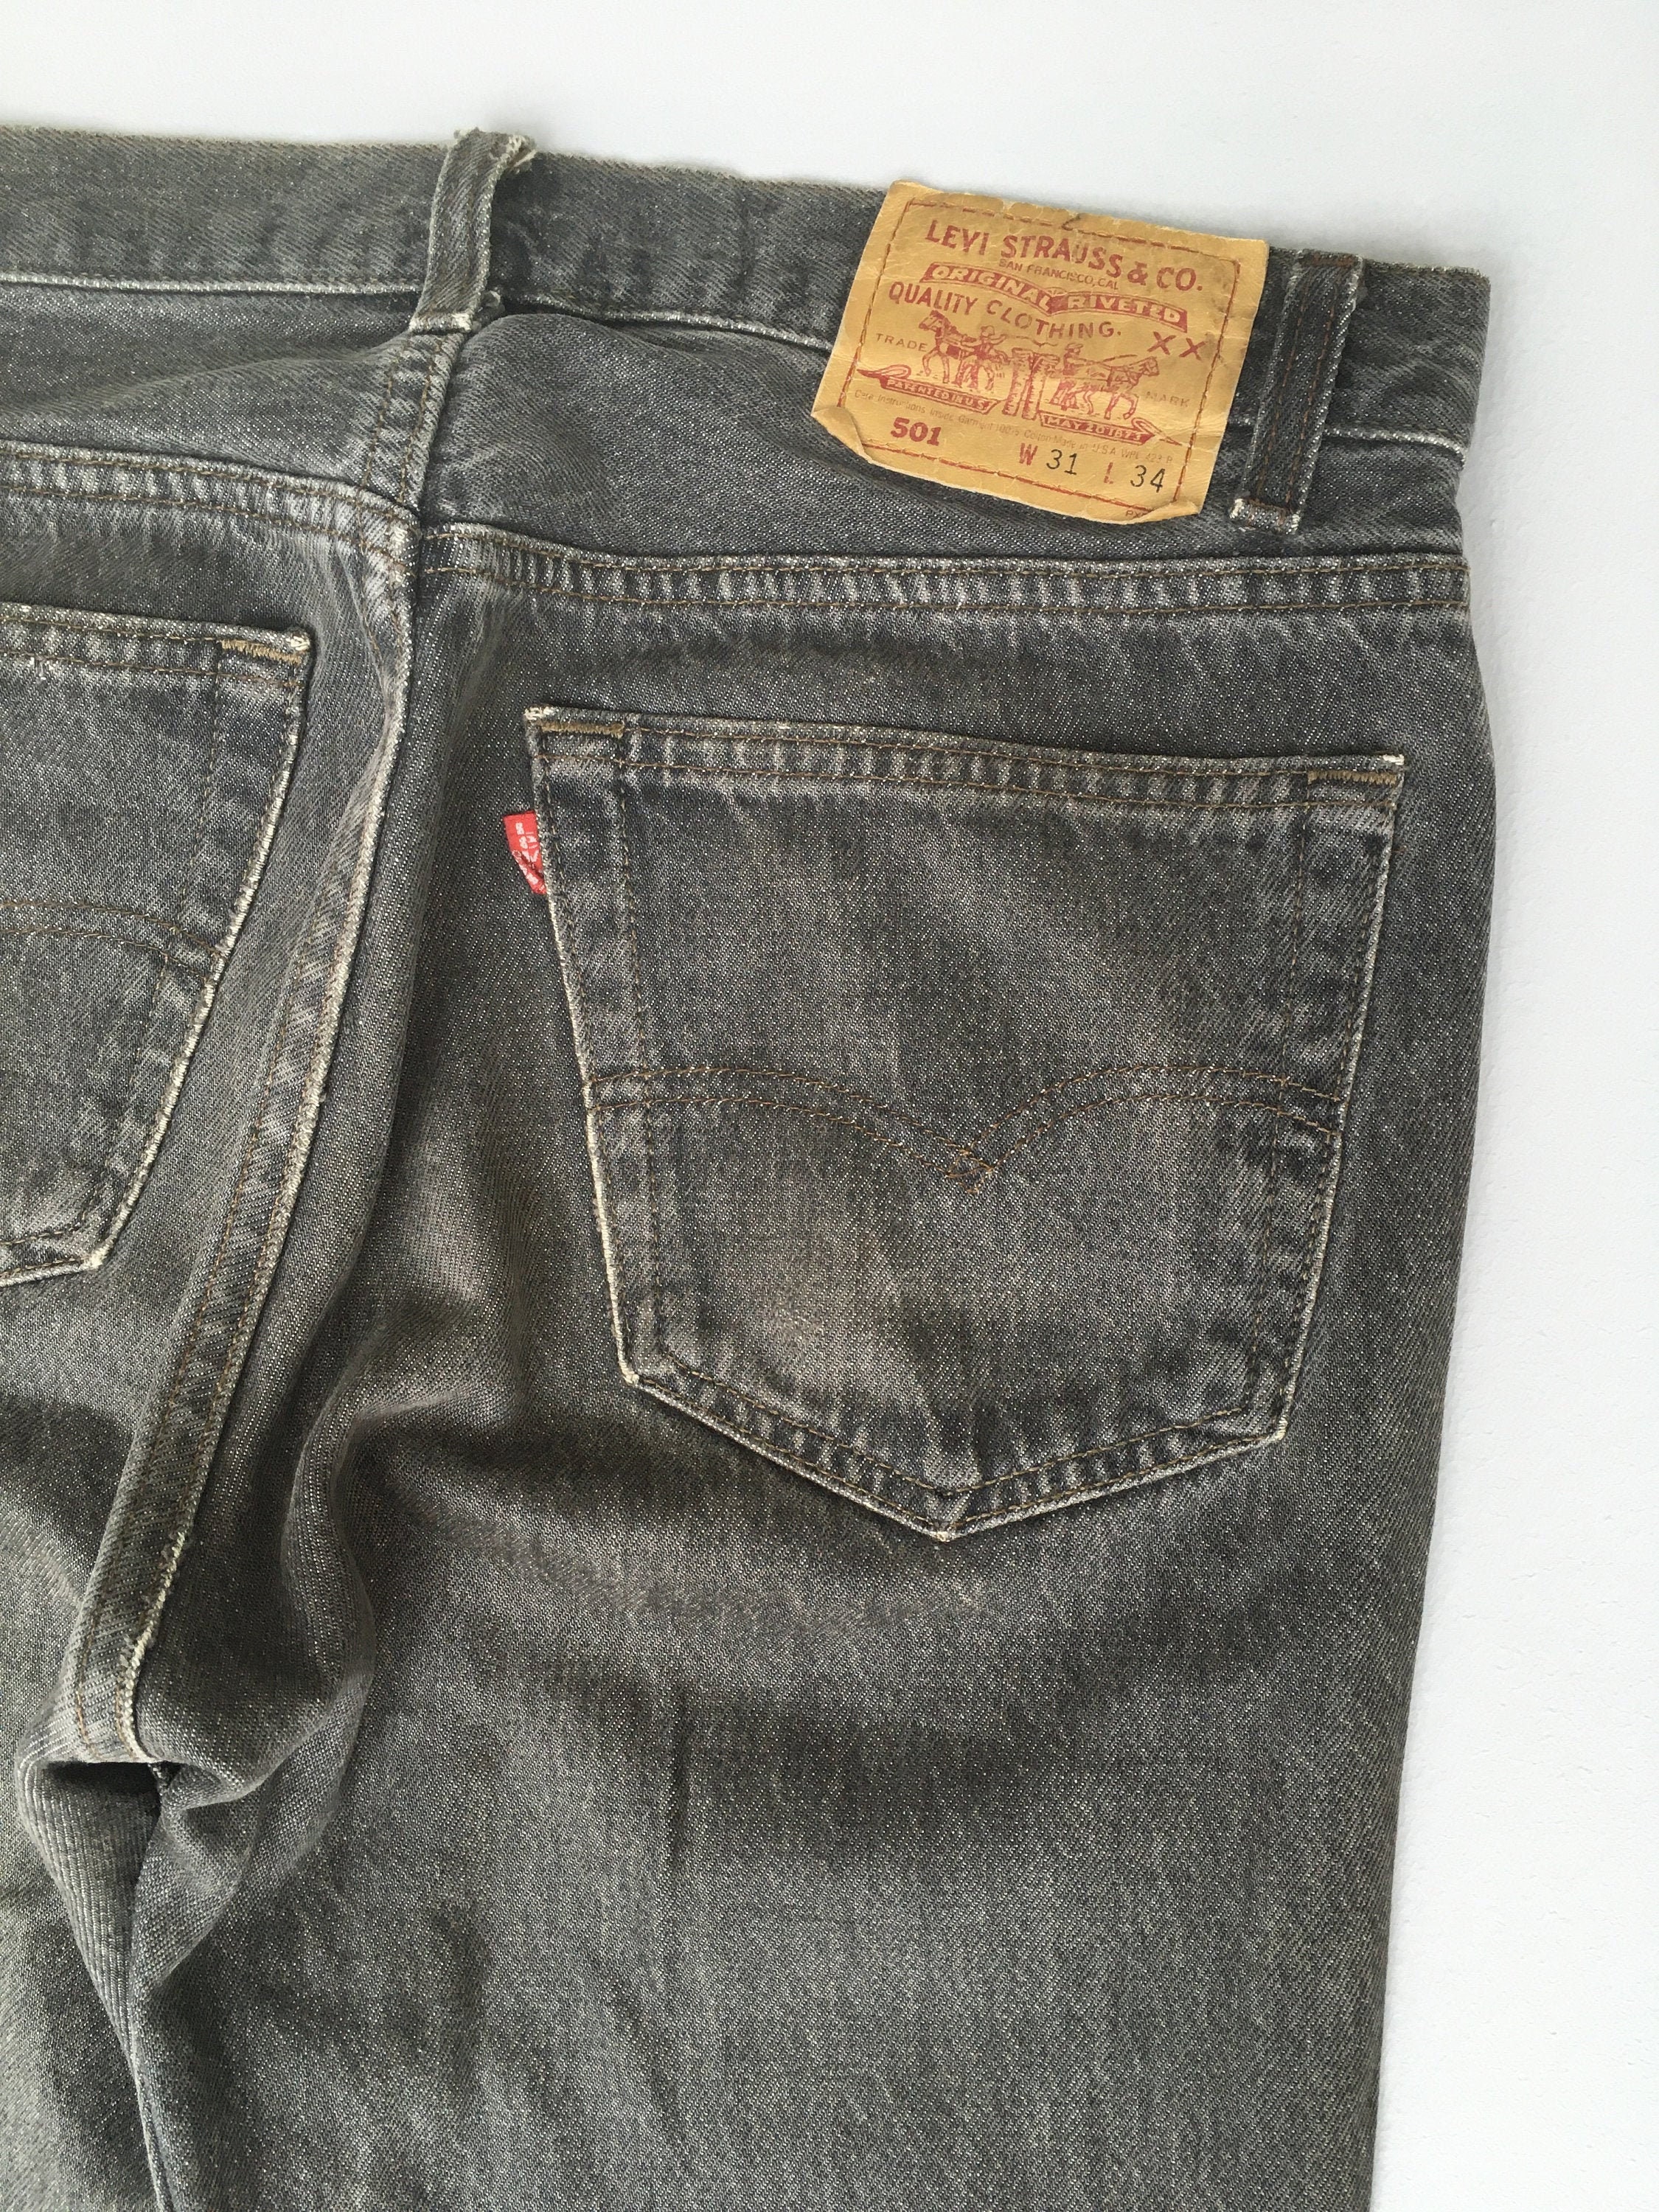 Size 30 Vintage Levis 501 Women's Black Jeans High Waisted - Etsy